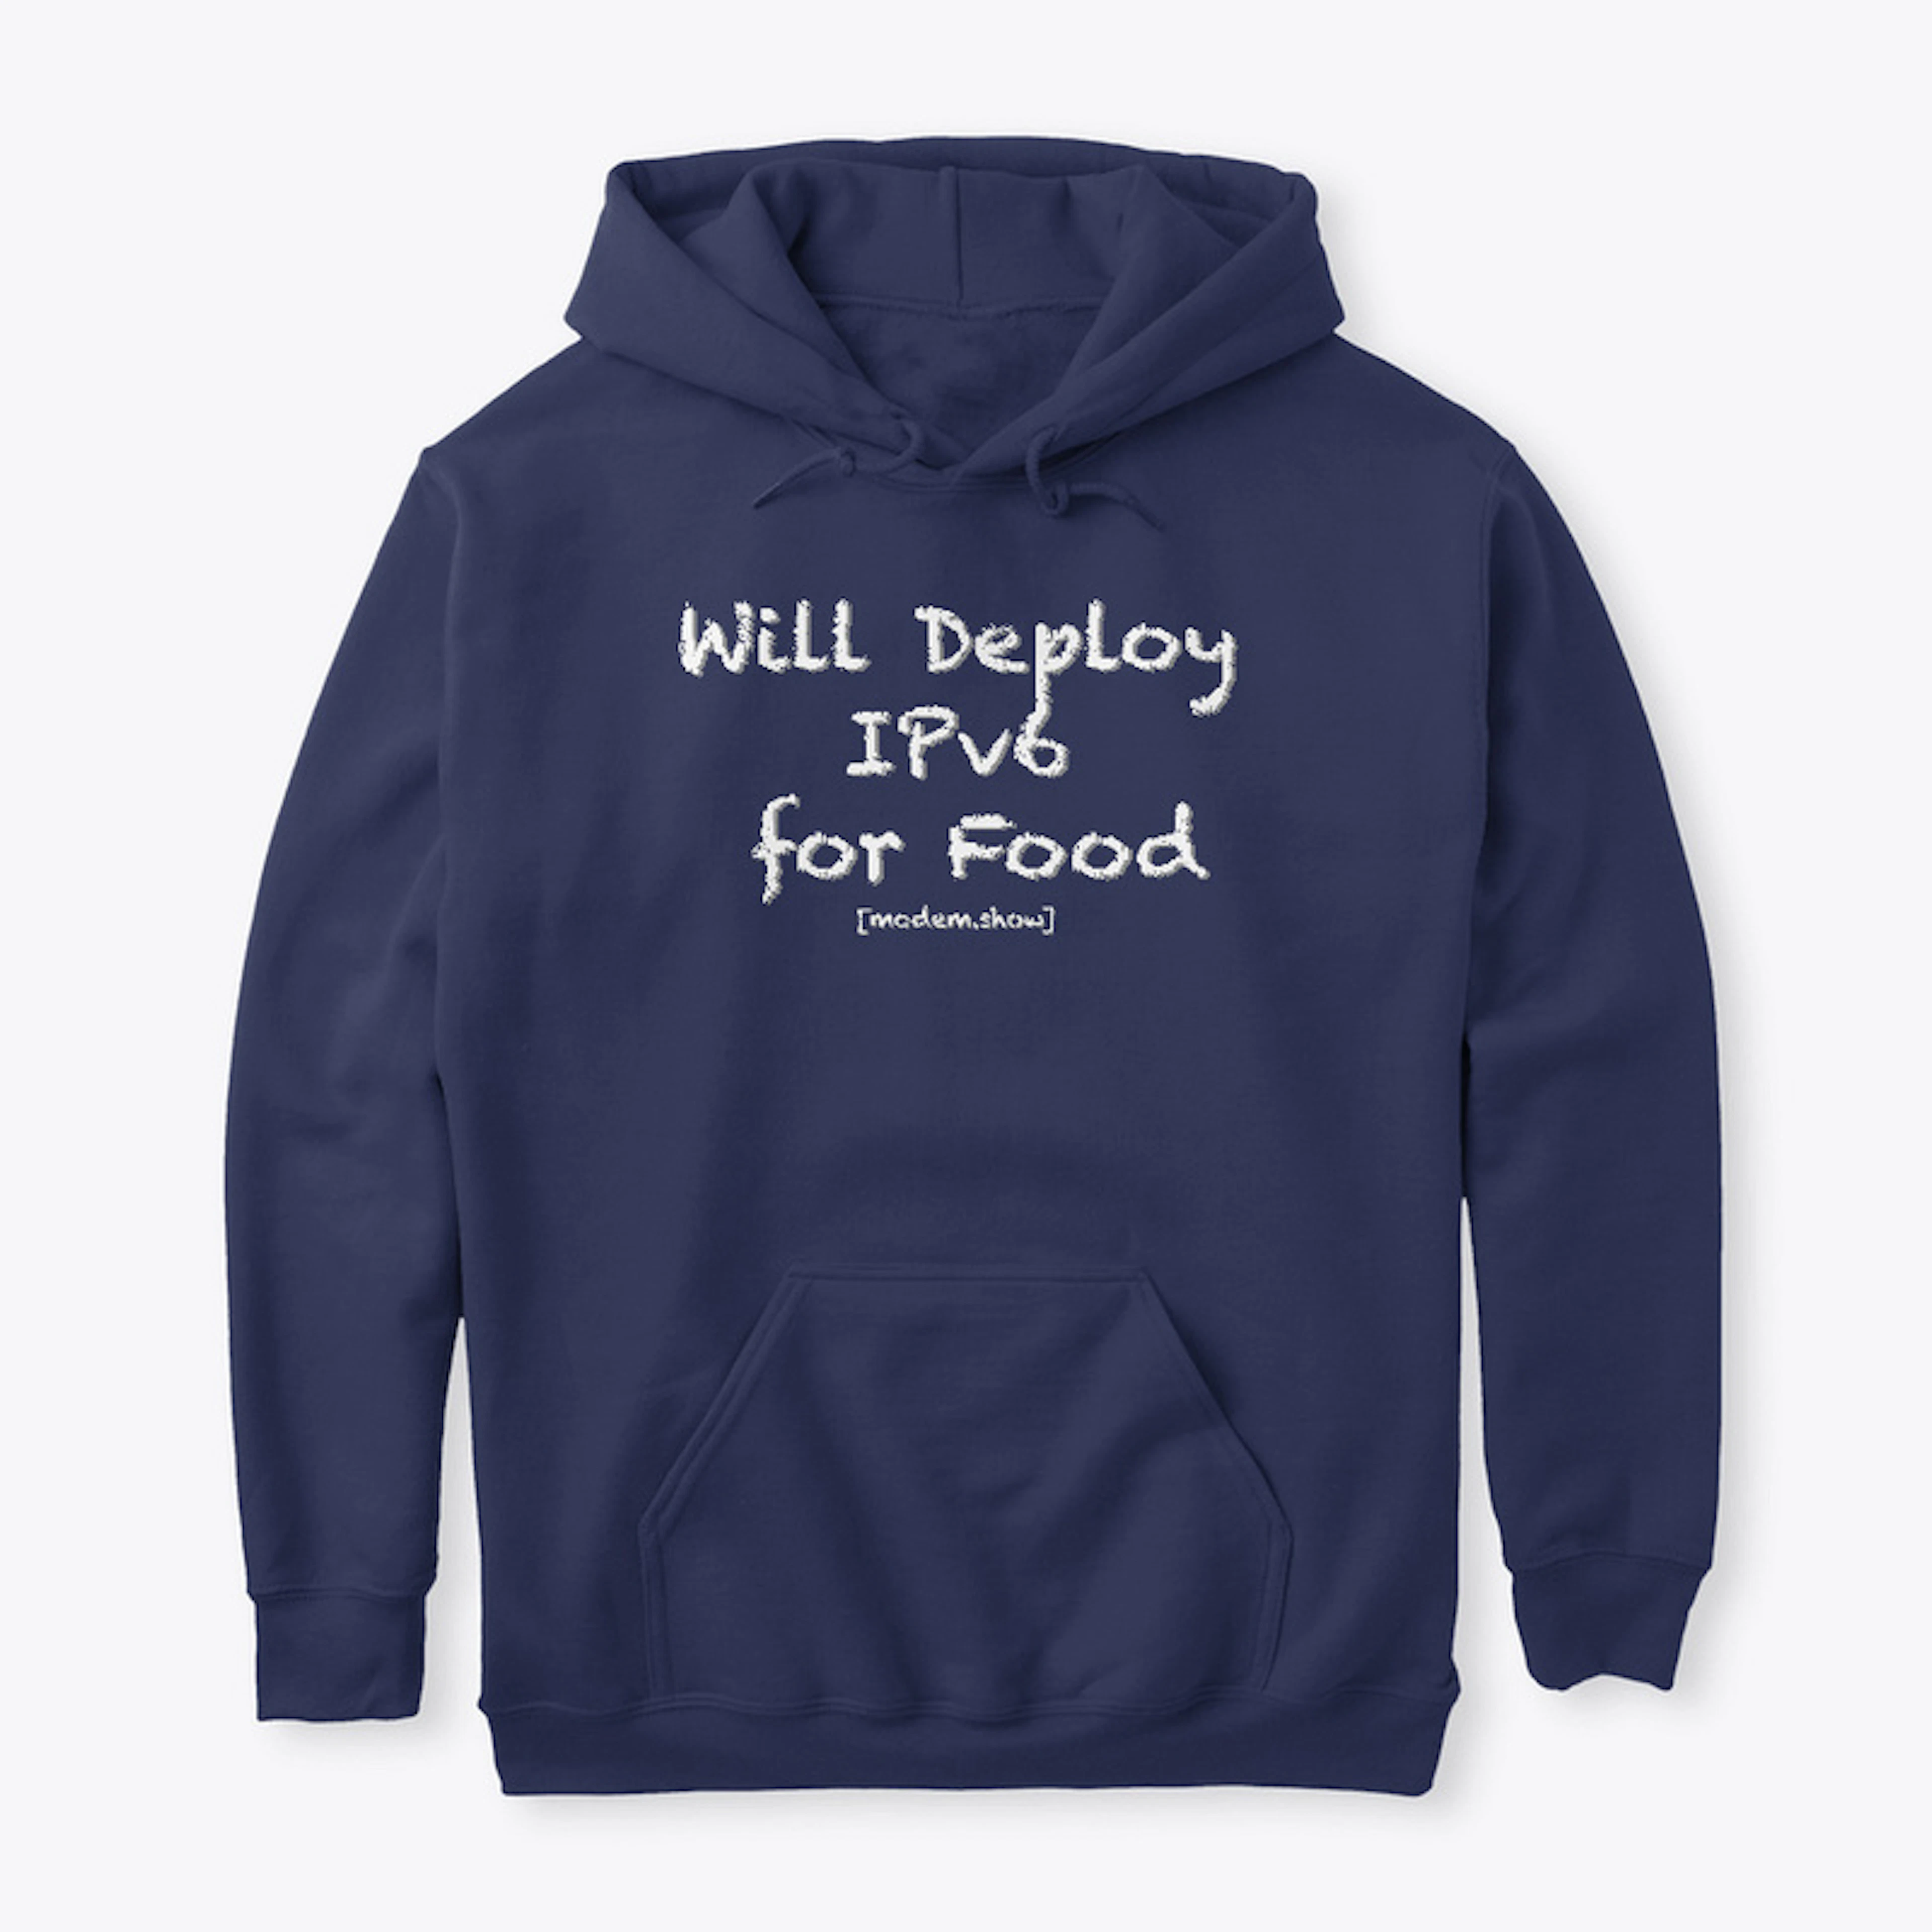 Will deploy IPv6 for food